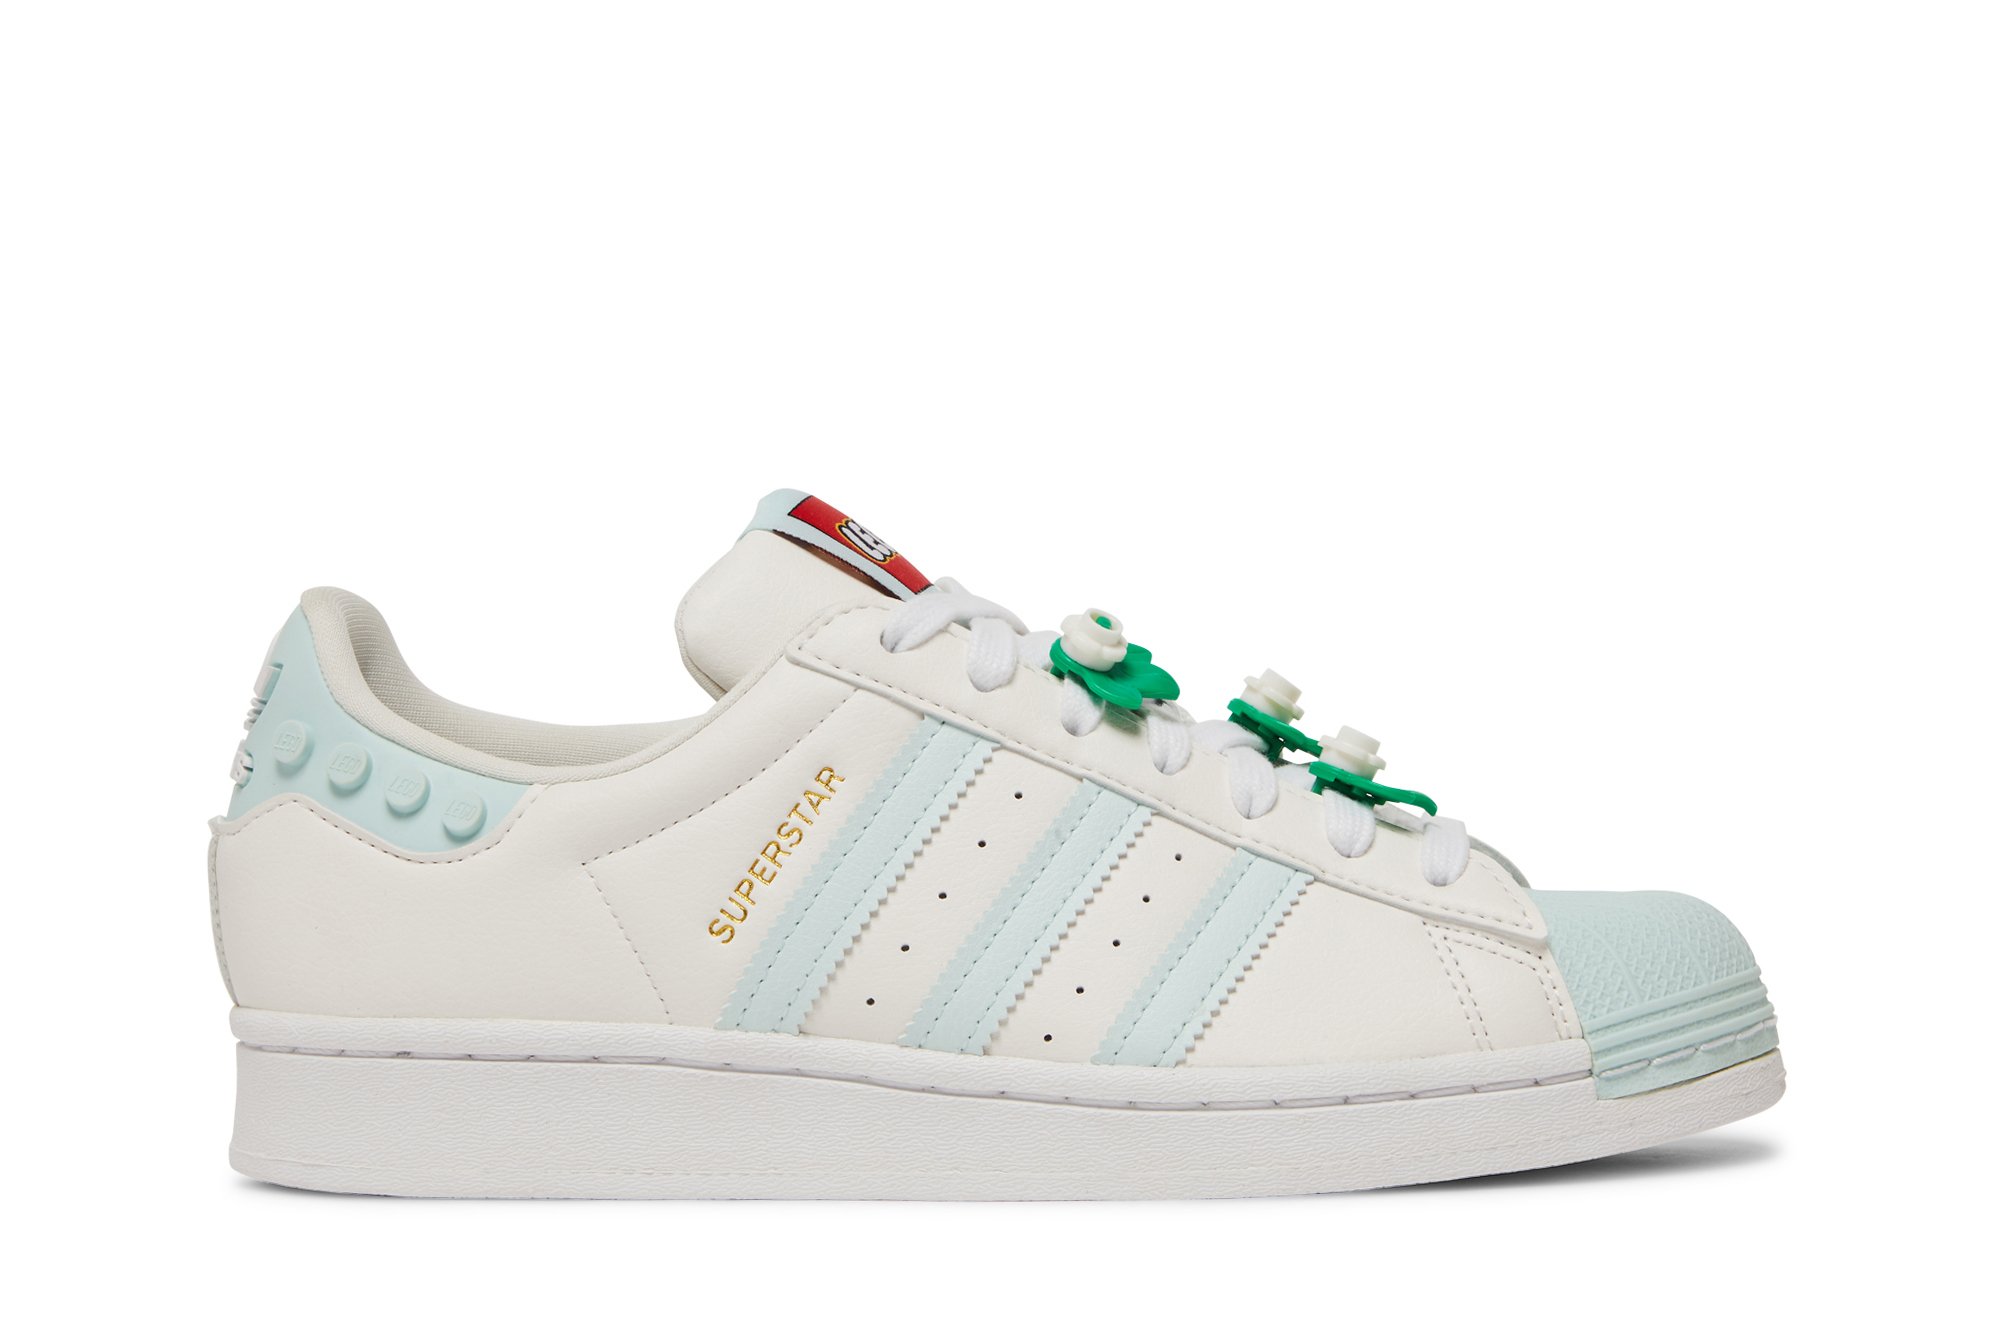 Buy LEGO x Wmns Superstar 'Clear White Ice Mint' - GX7206 | GOAT